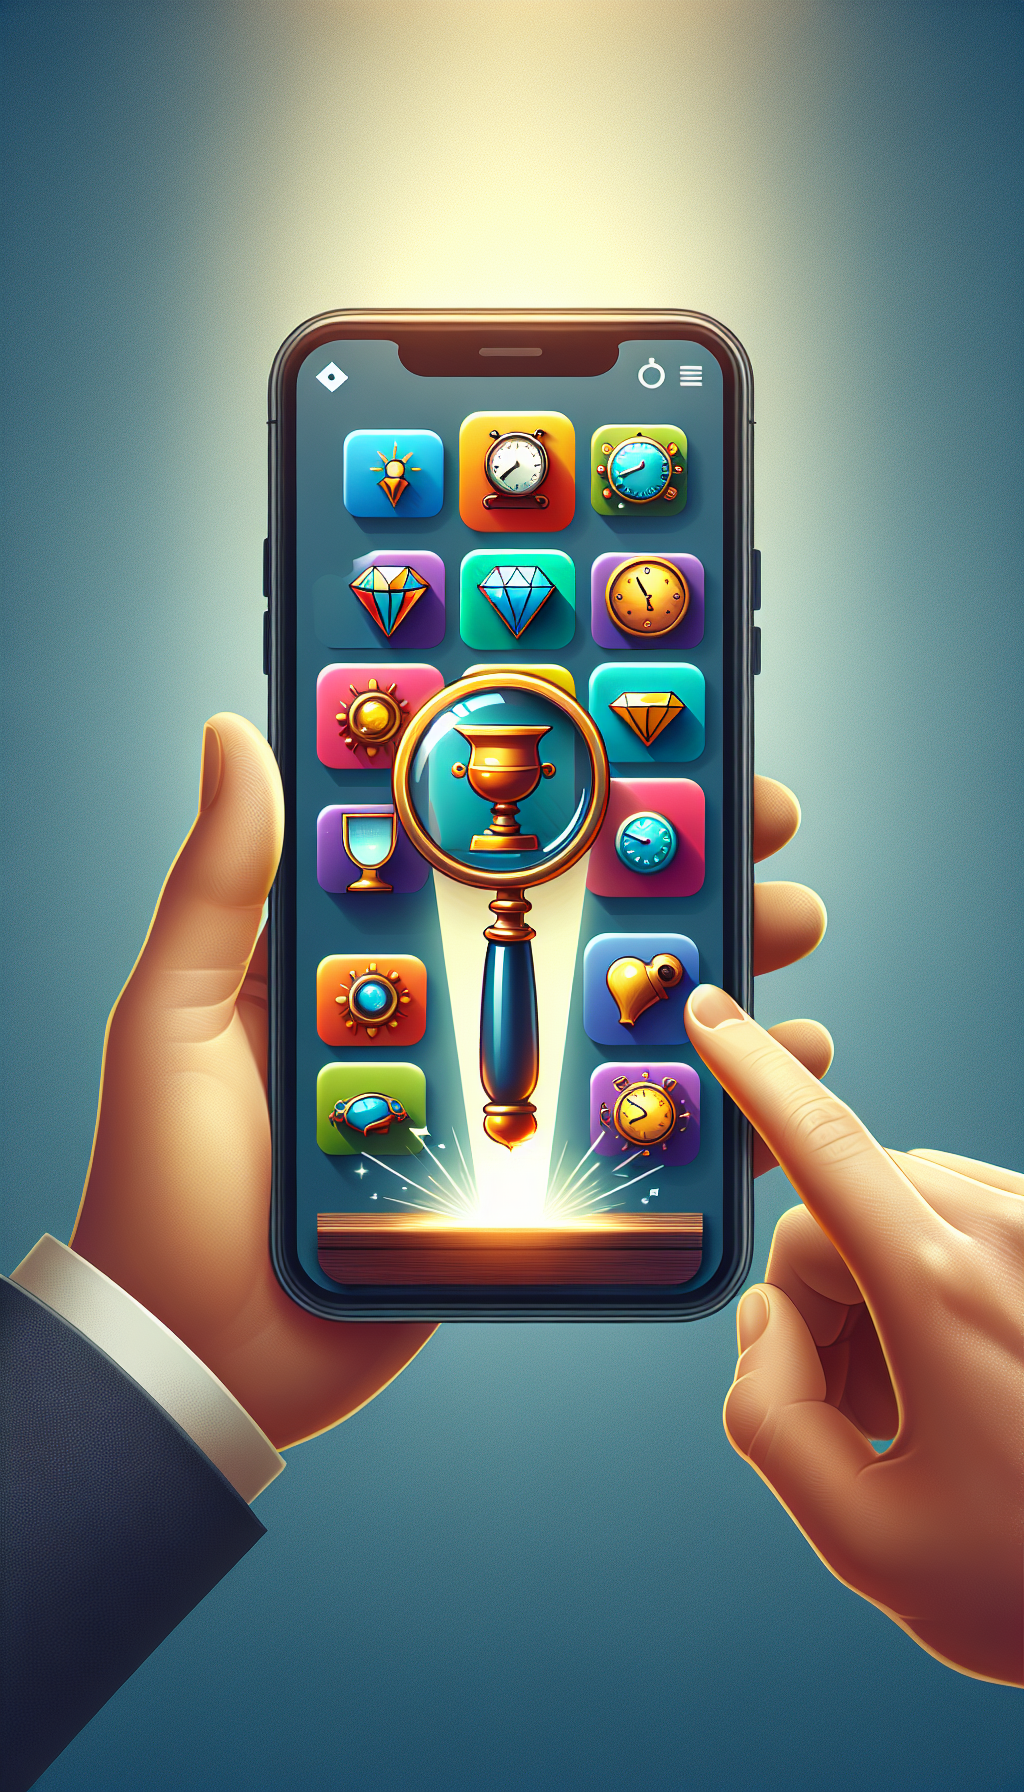 An illustration of a smartphone screen displaying a whimsical, vintage magnifying glass that whimsically morphs into a series of colorful app icons, each featuring a different aspect of antique appraisal (like a jewel, vase, clock, and furniture). The phone casts light on an antique item, symbolizing the process of appraisal, with the light beams indicating step-by-step instructions or progression.